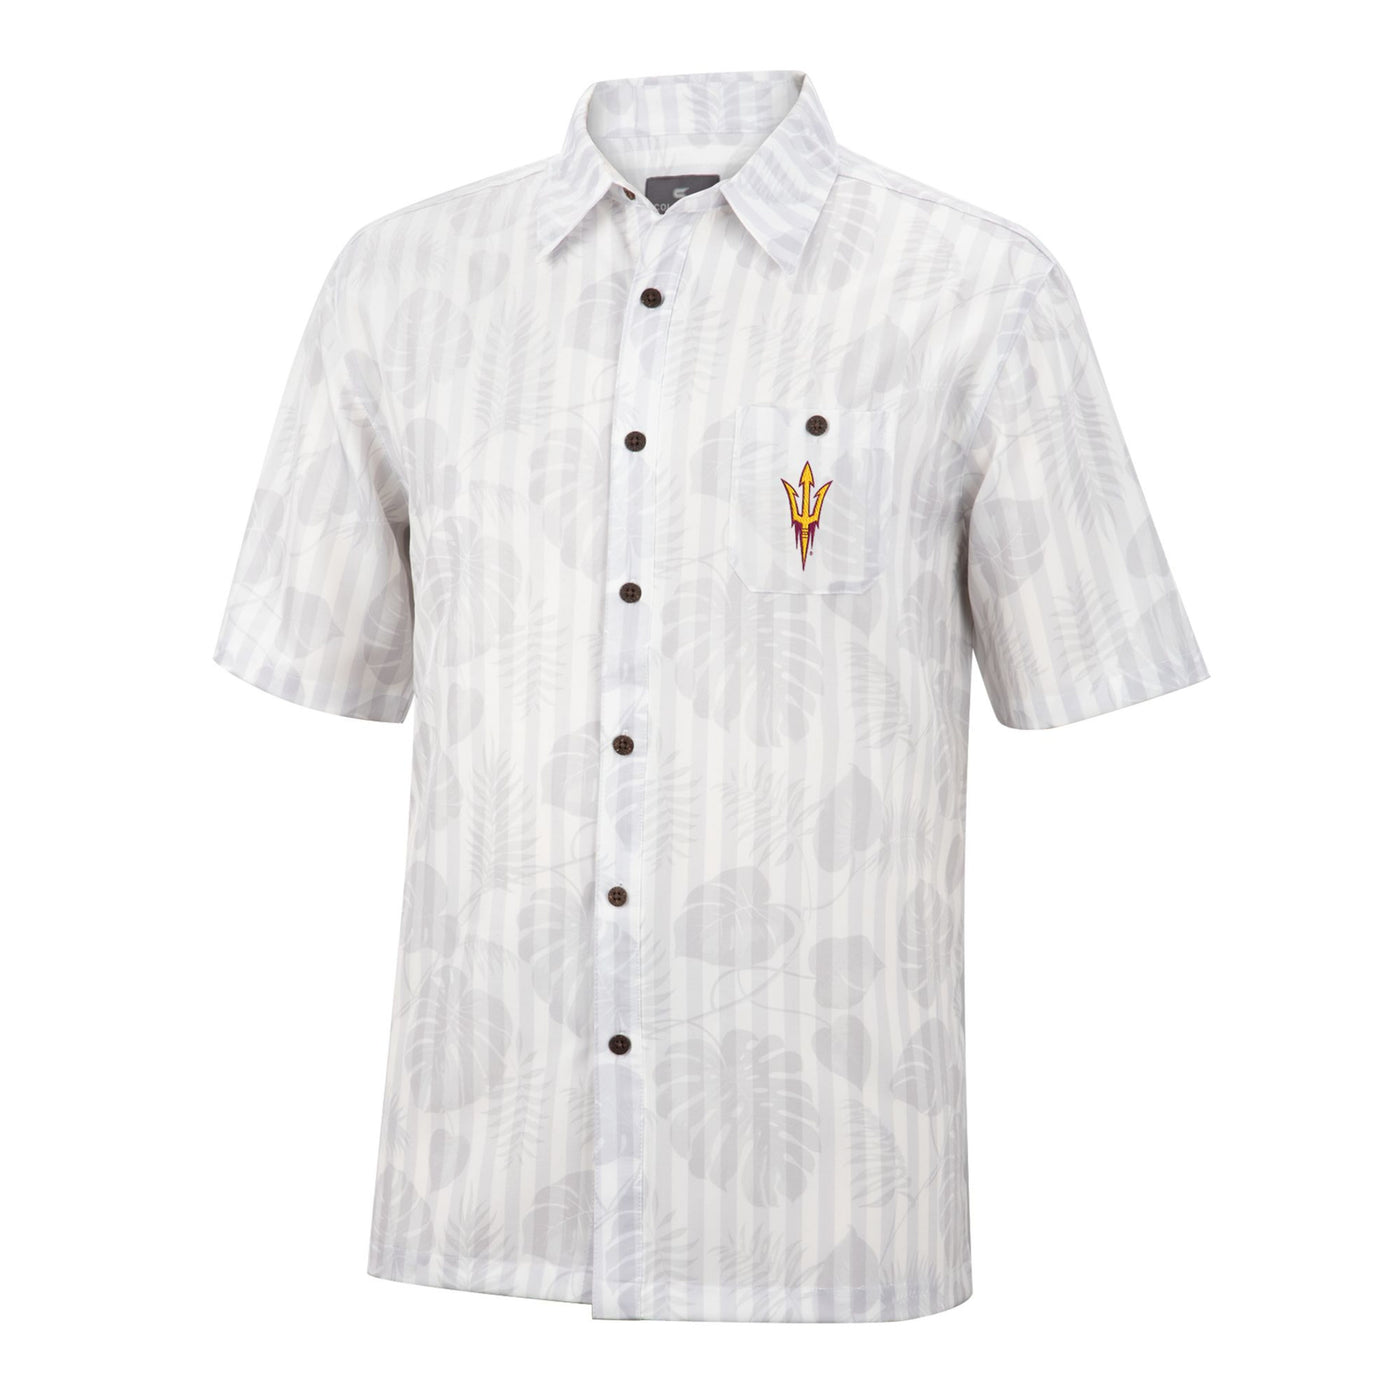 ASU white Hawaiian button down with gold and maroon pitchfork on chest pocket